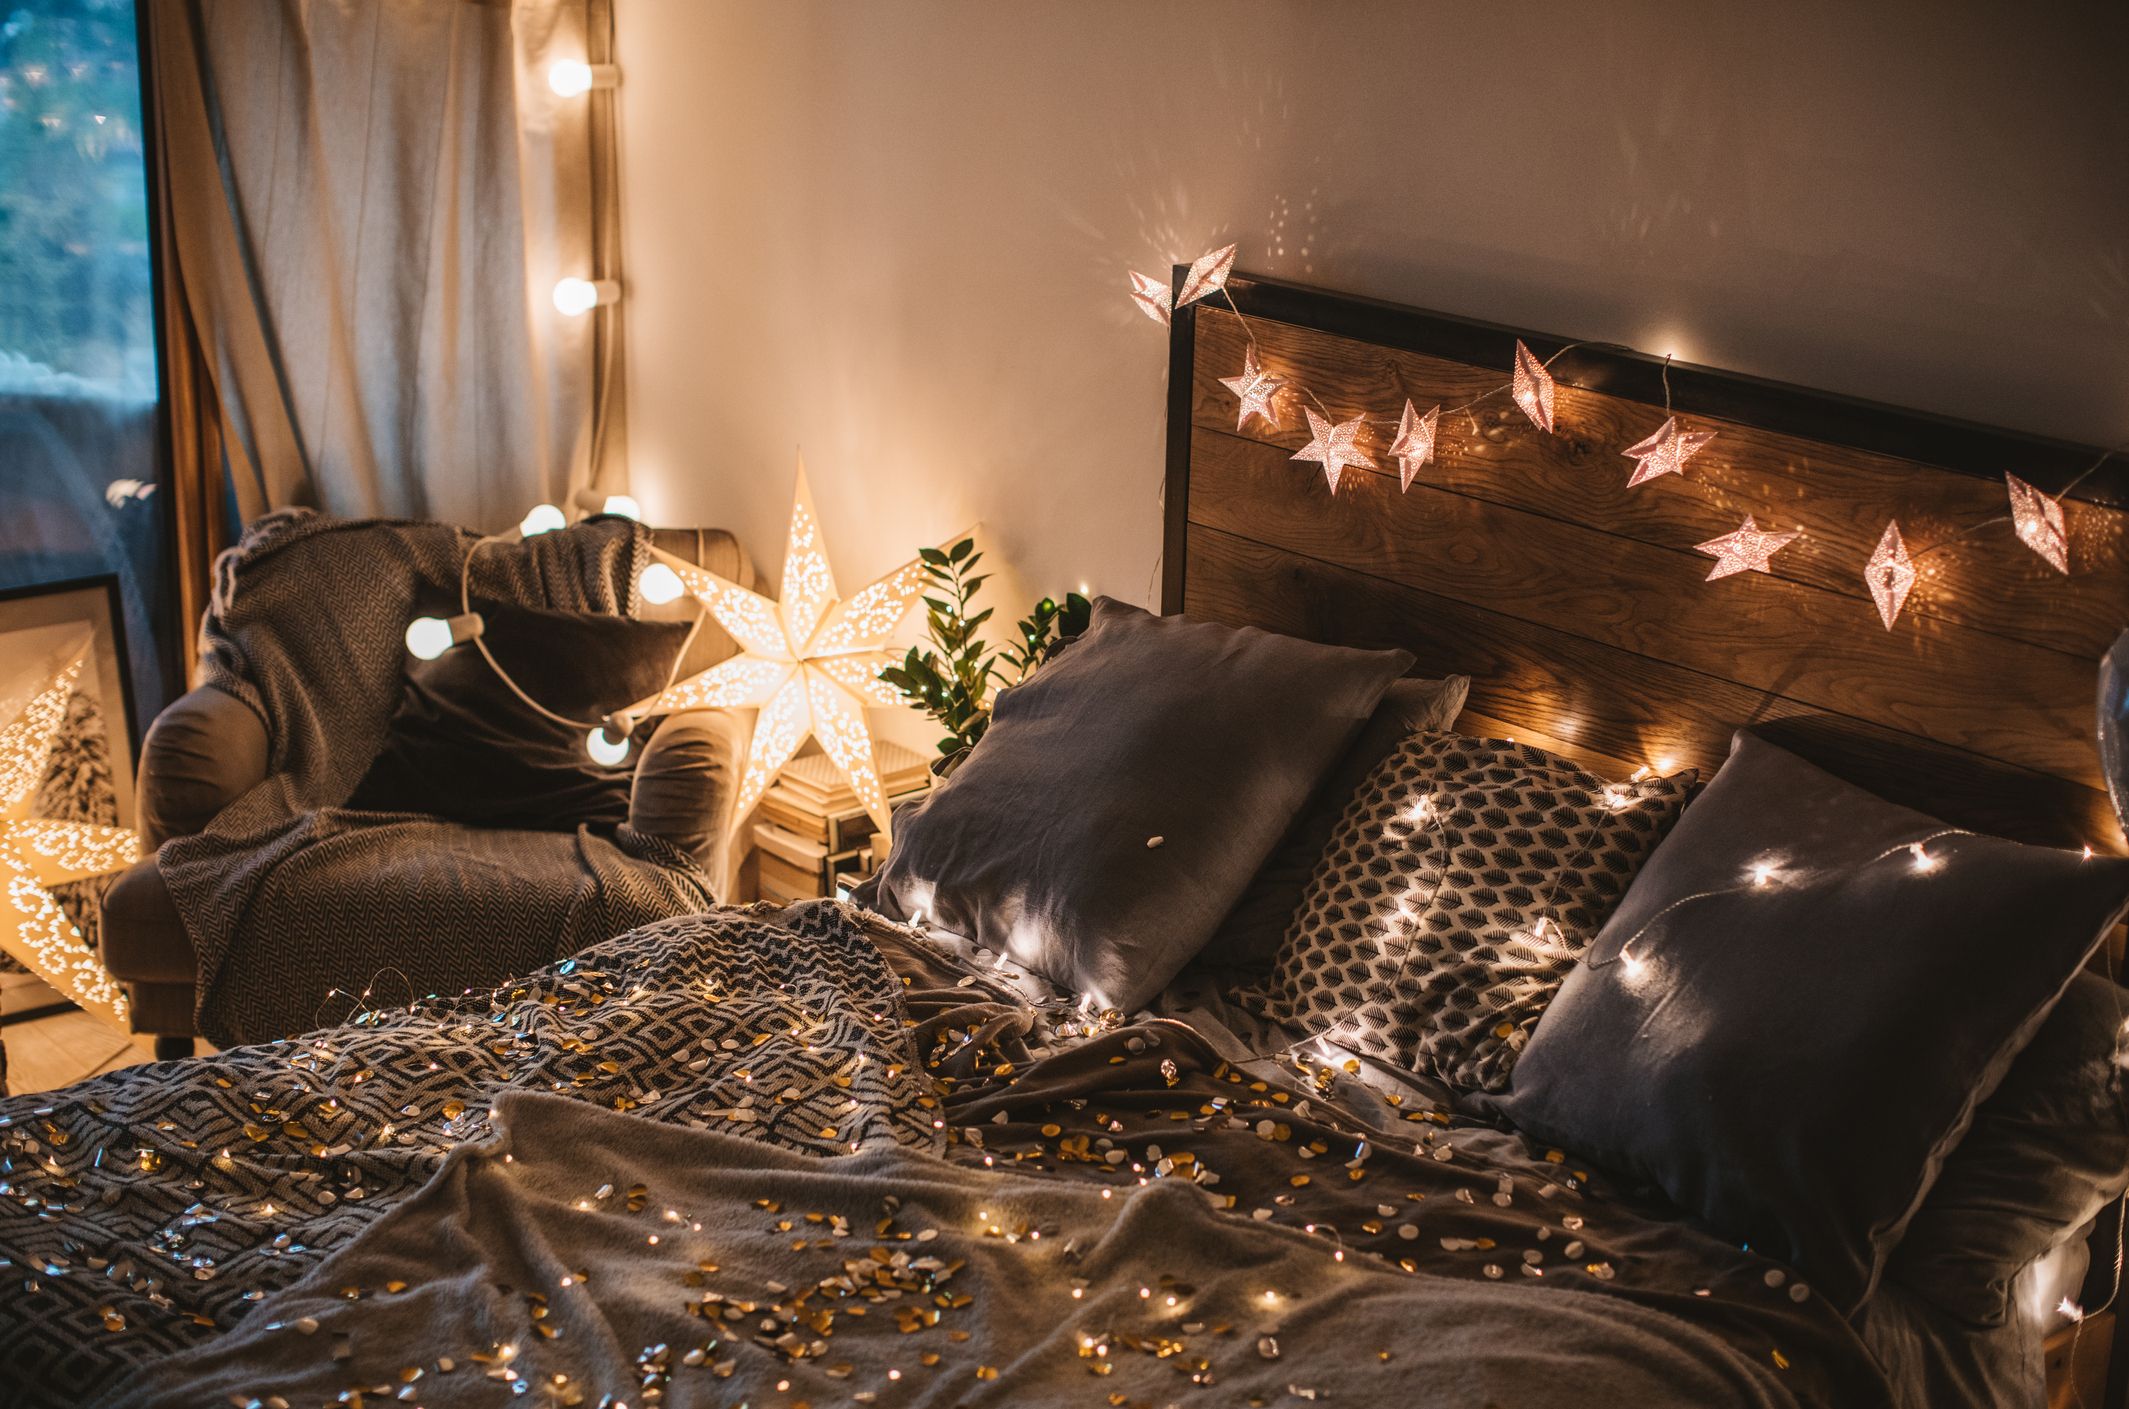 fairy lights above bed